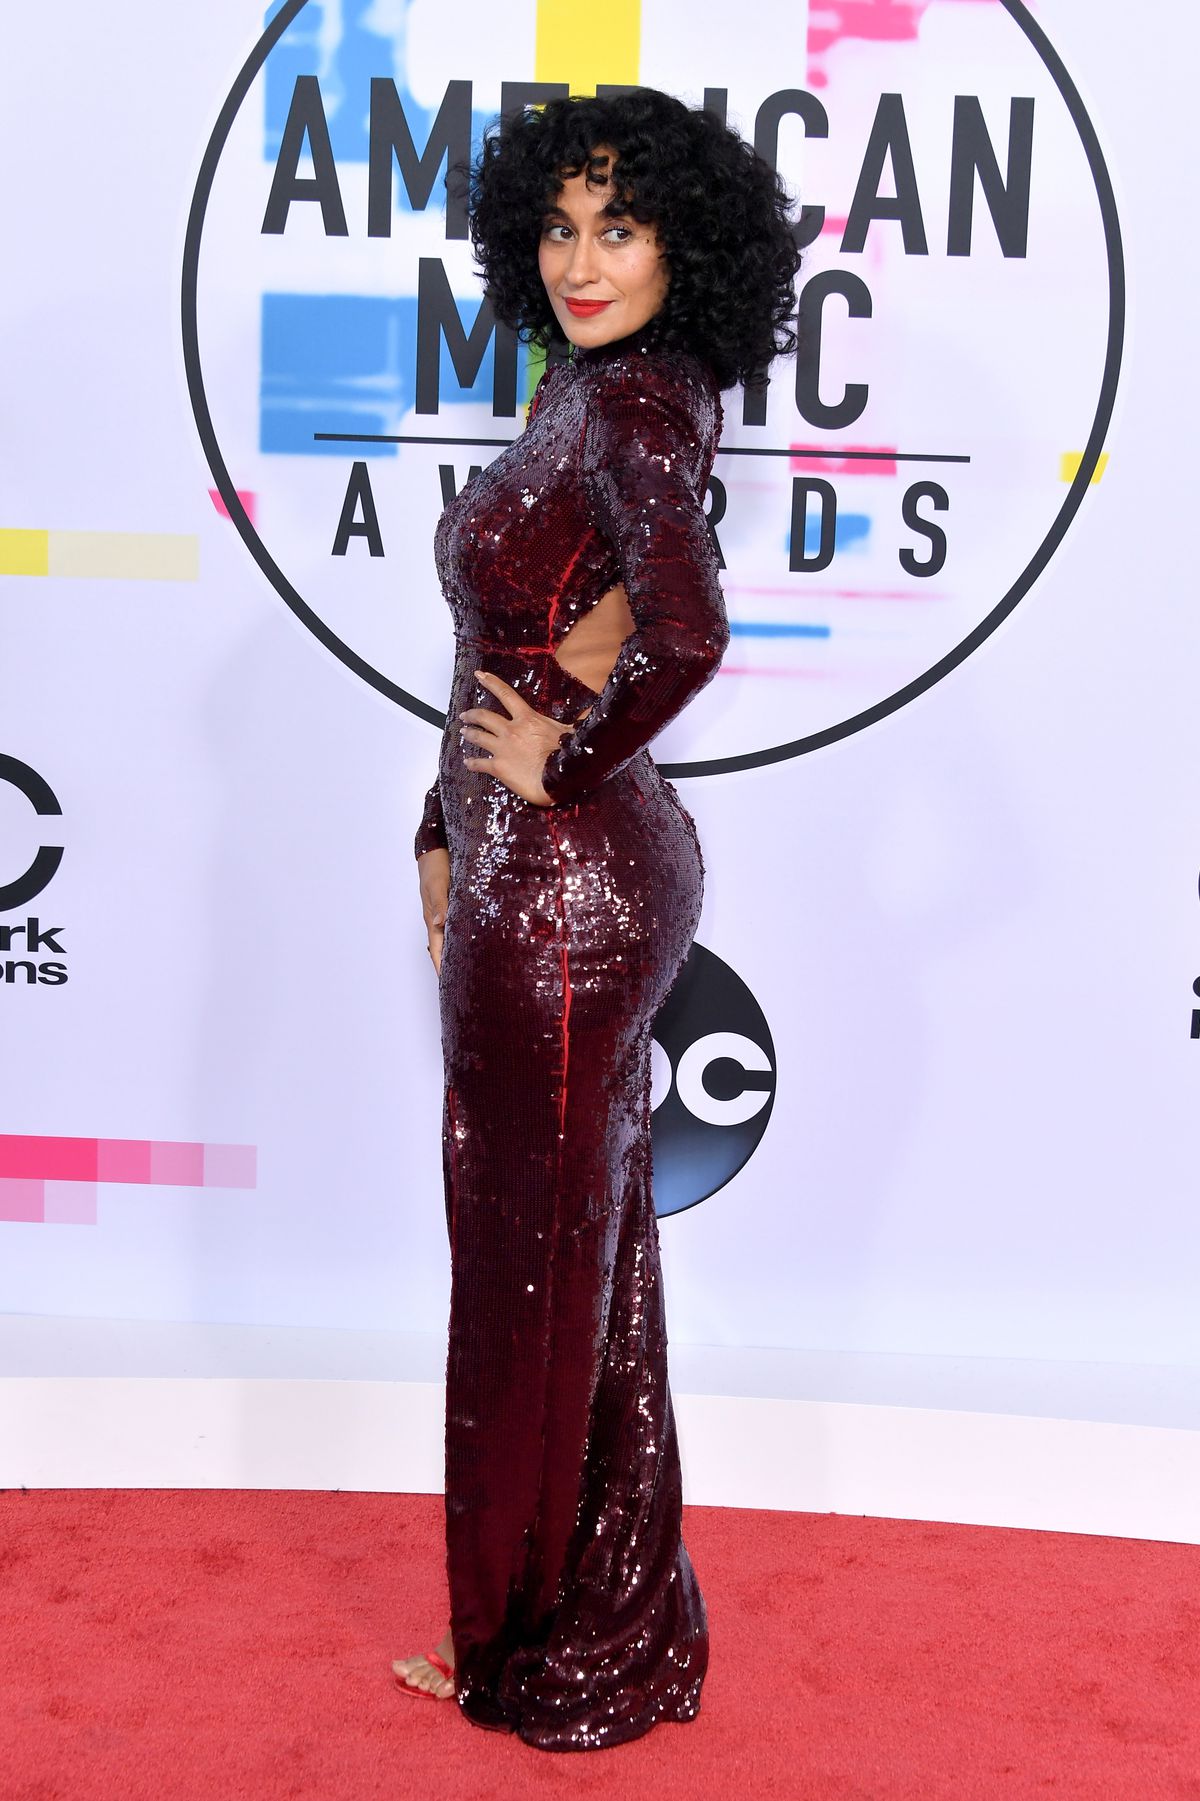 LOS ANGELES, CA - NOVEMBER 19:  Tracee Ellis Ross attends the 2017 American Music Awards at Microsoft Theater on November 19, 2017 in Los Angeles, California.